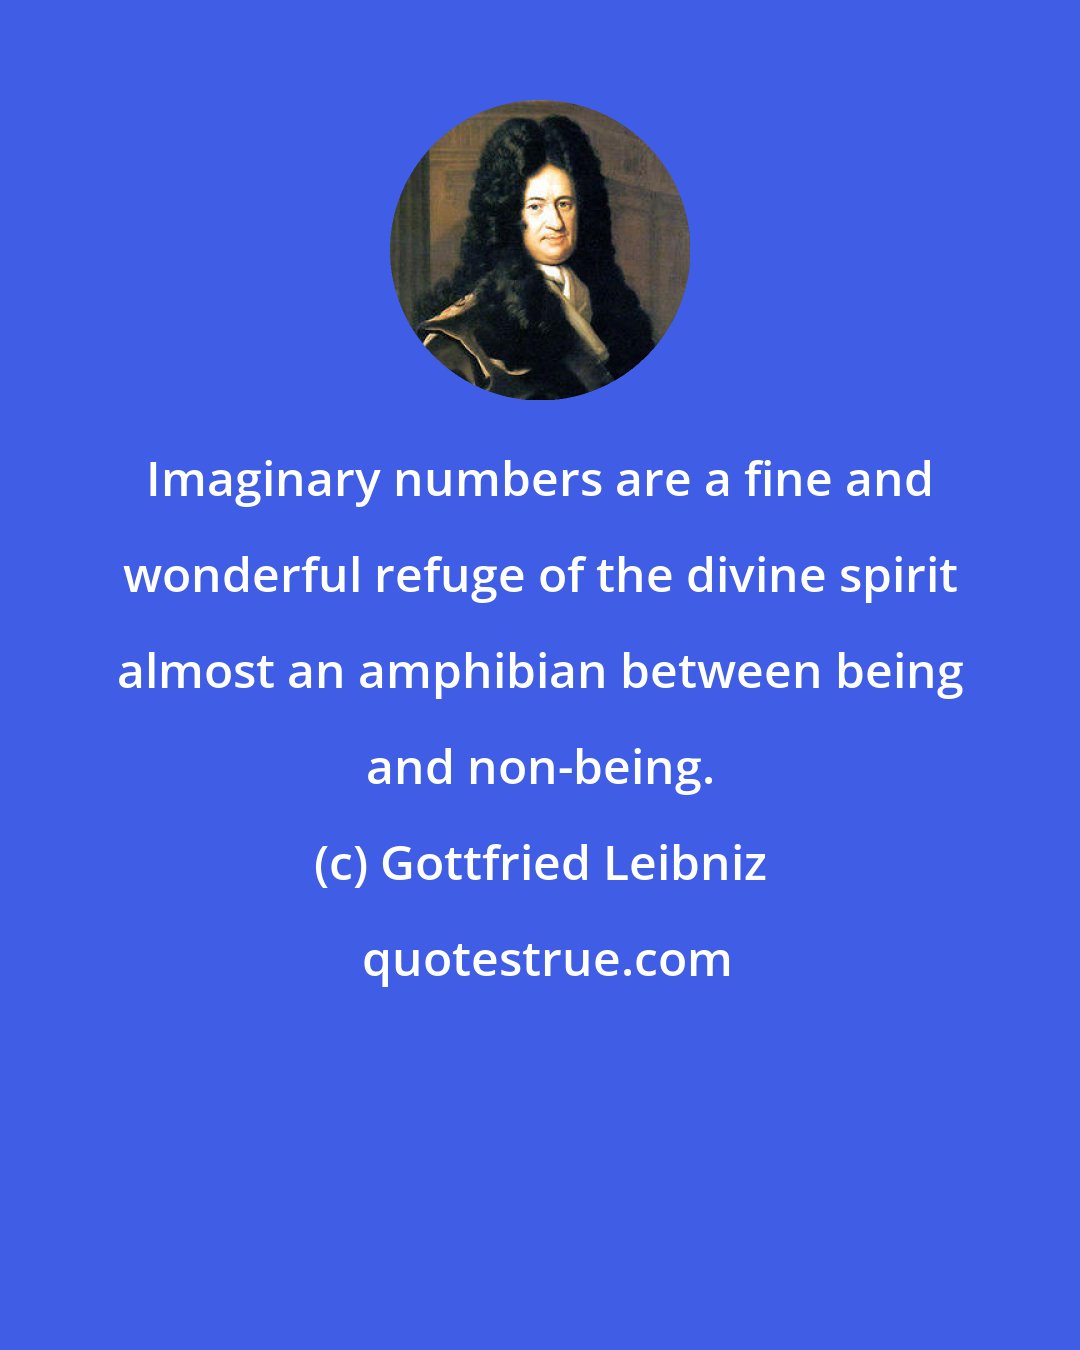 Gottfried Leibniz: Imaginary numbers are a fine and wonderful refuge of the divine spirit almost an amphibian between being and non-being.